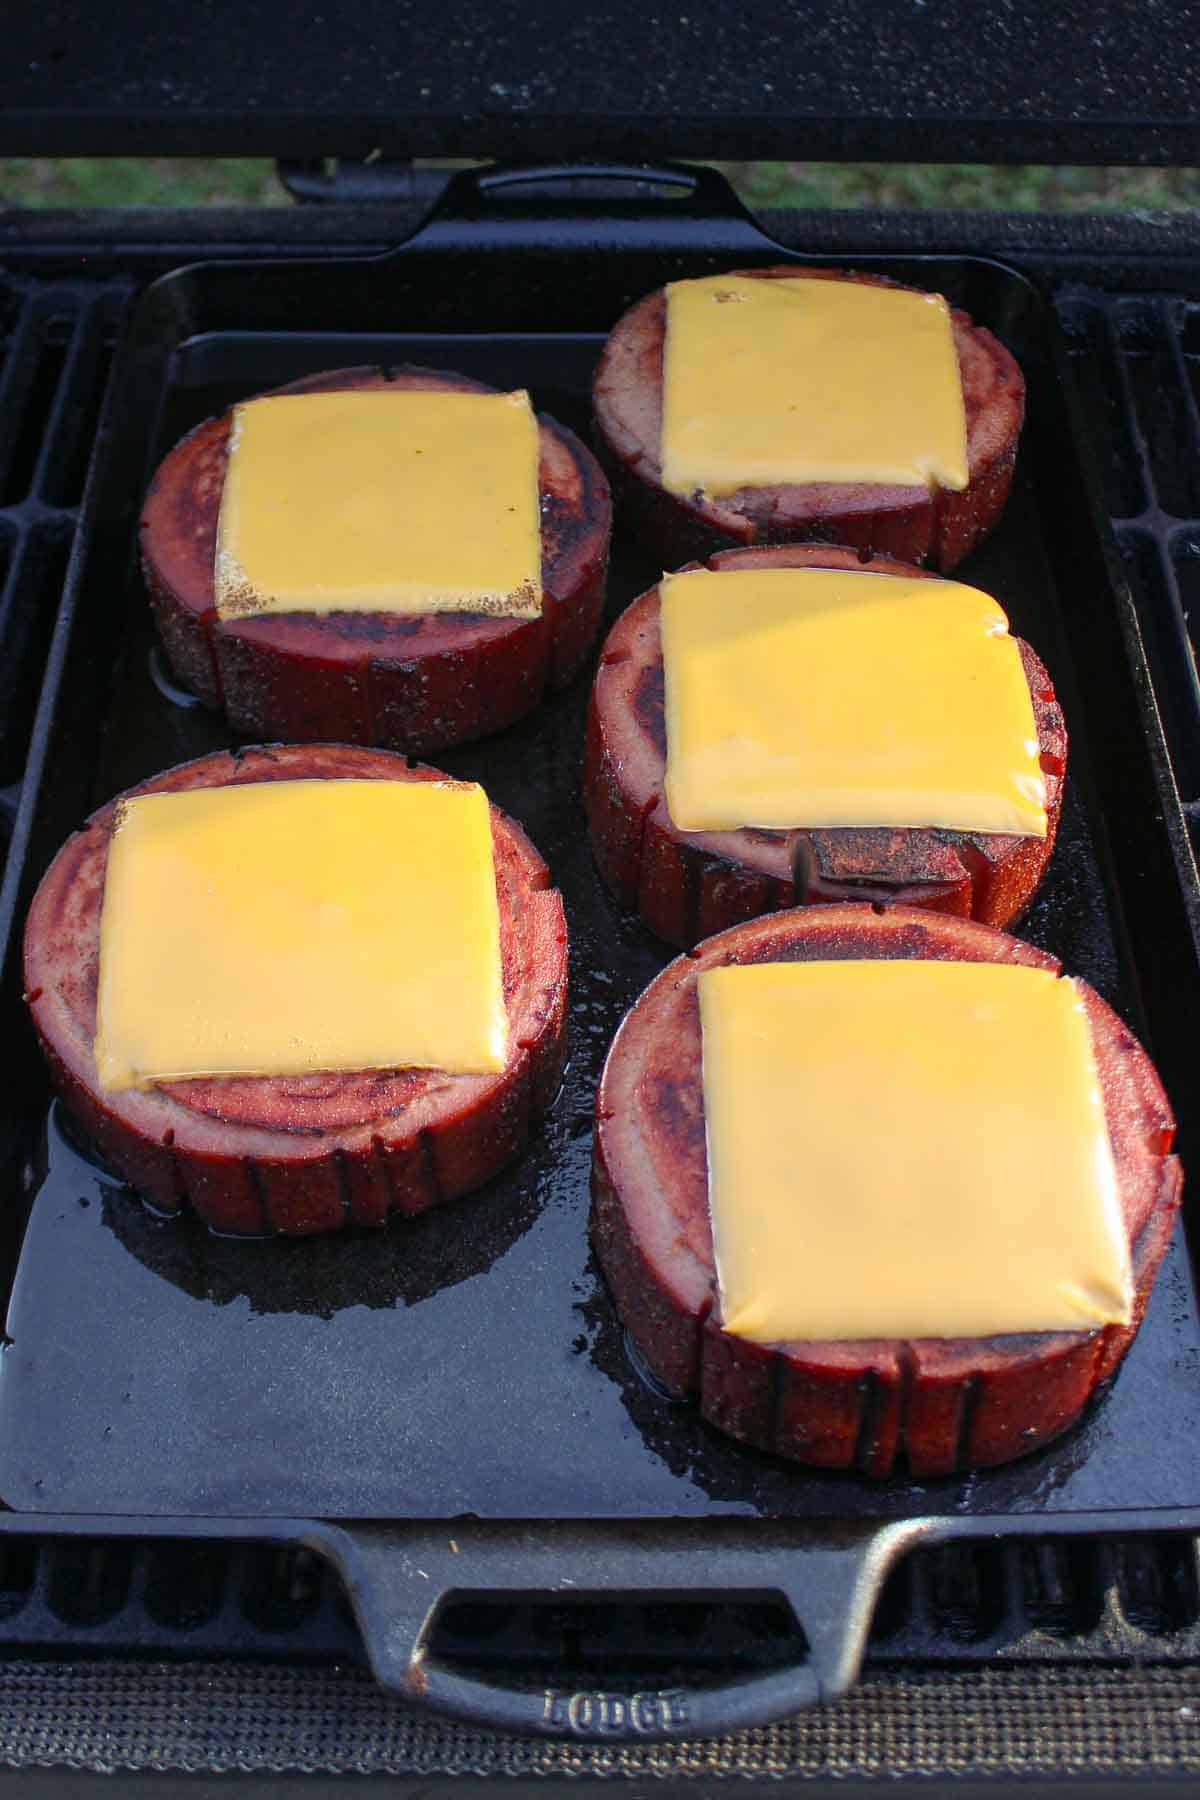 Melted cheese on top of the bologna slices.